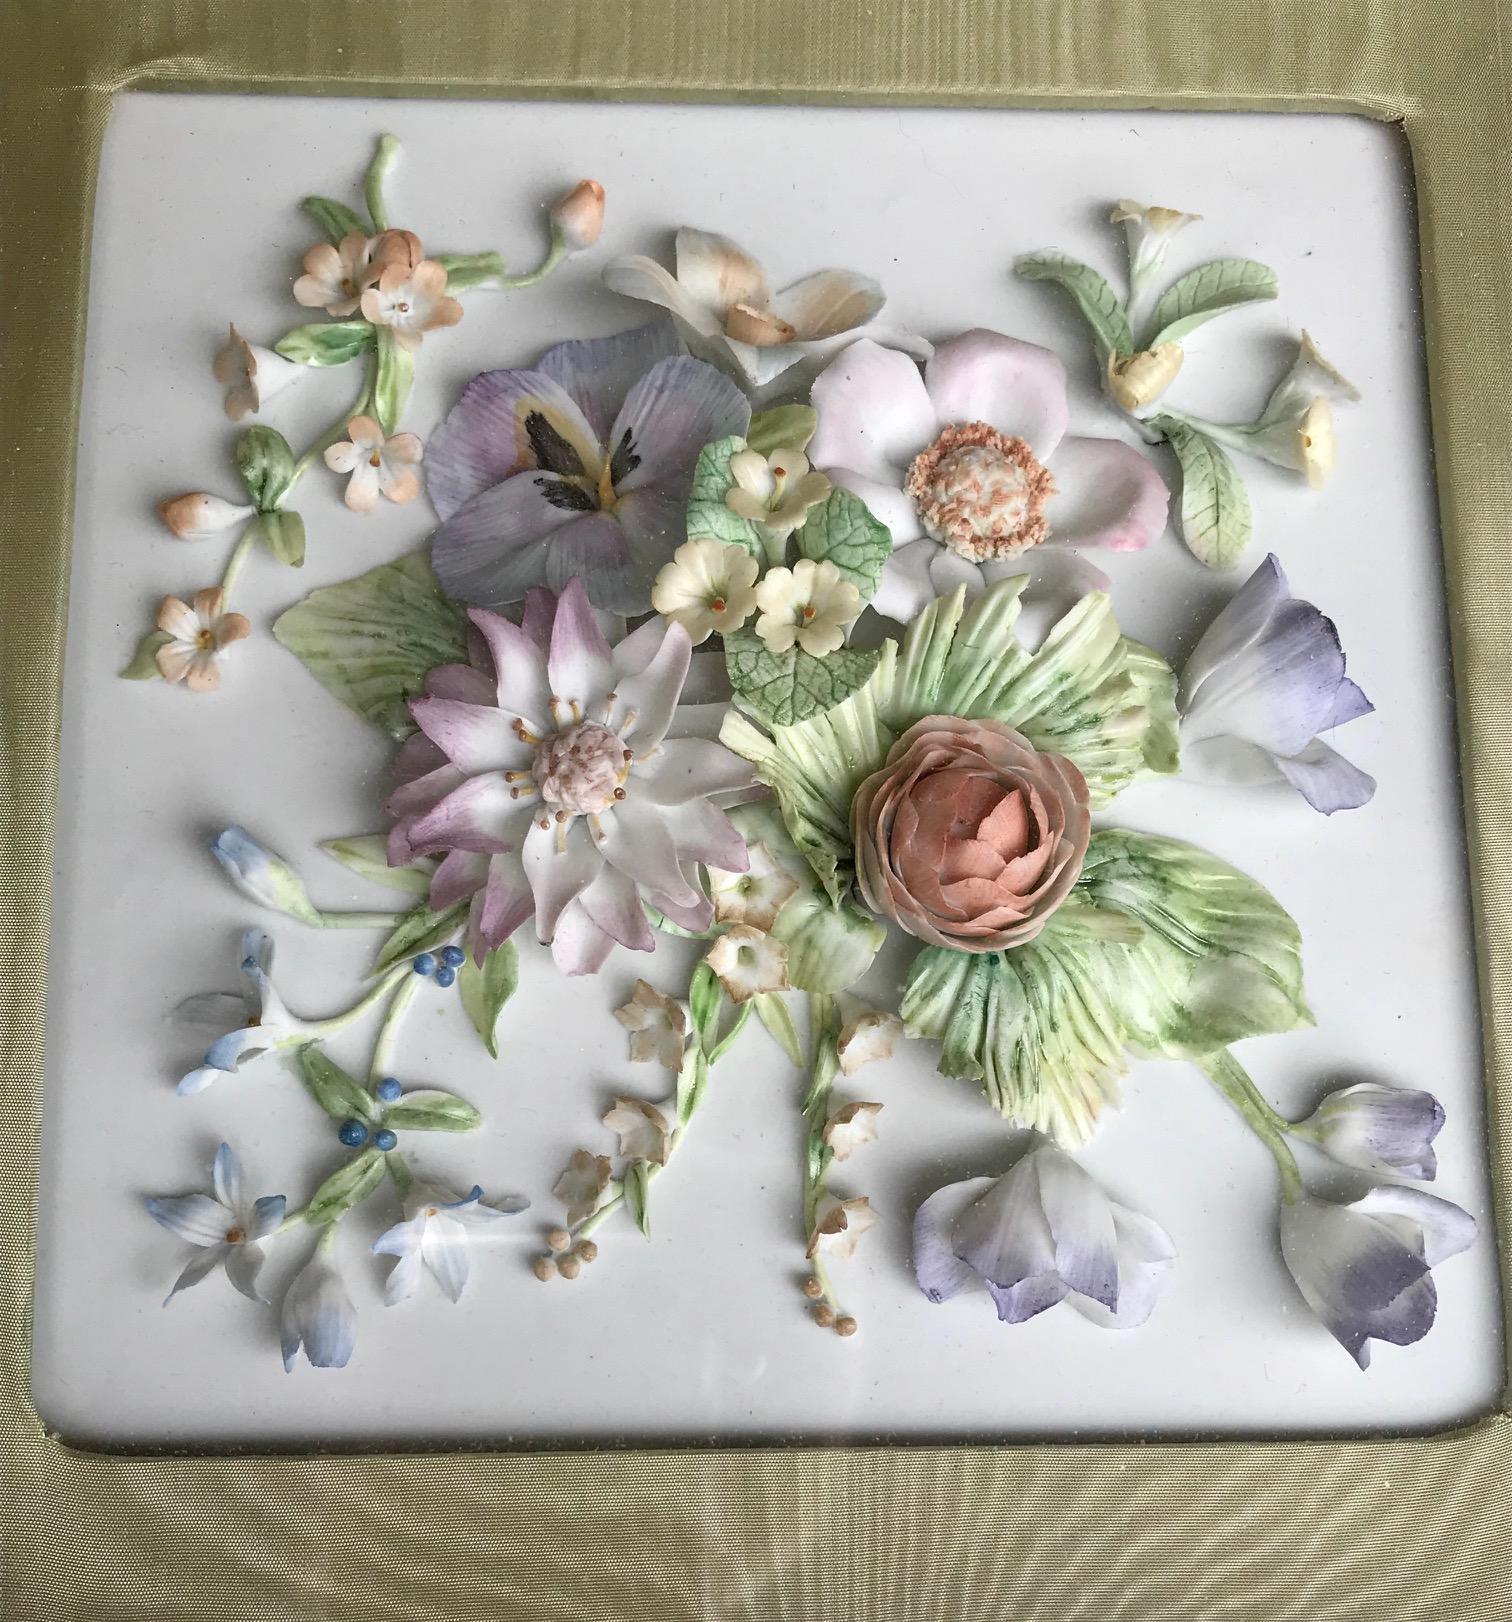 This is a pair of the finest 19th century German bisque porcelain plaques, circa 1870. Masterfully sculpted floral bouquets in three dimensions. Each one is uniquely created and extraordinary in detail and quality. 

Both pieces are in pristine